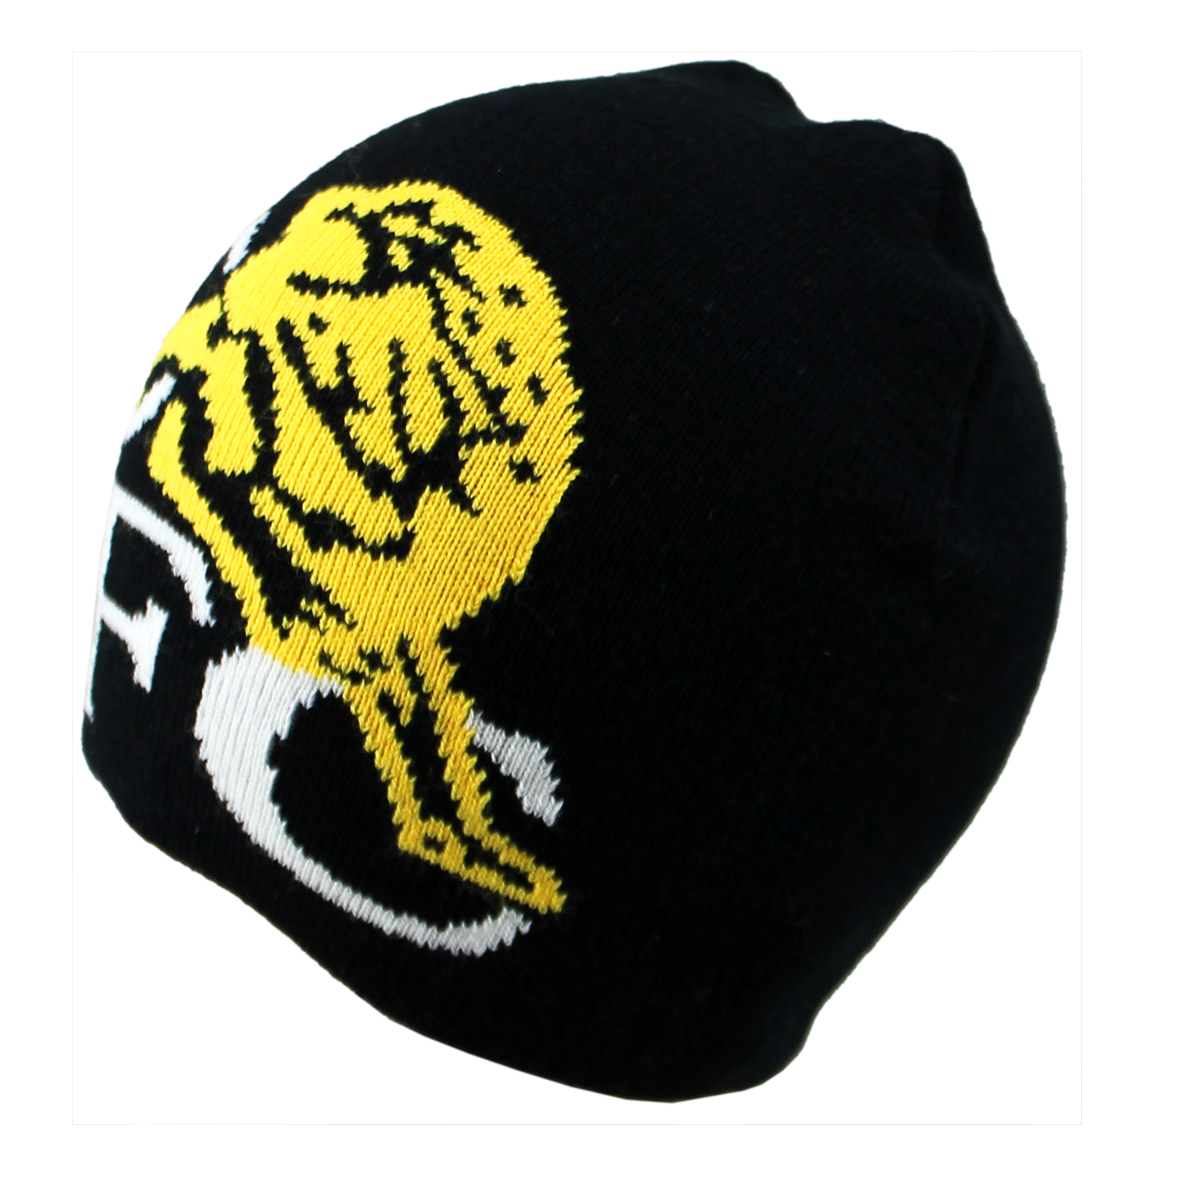 Fashionable Acrylic Knitted Beanie